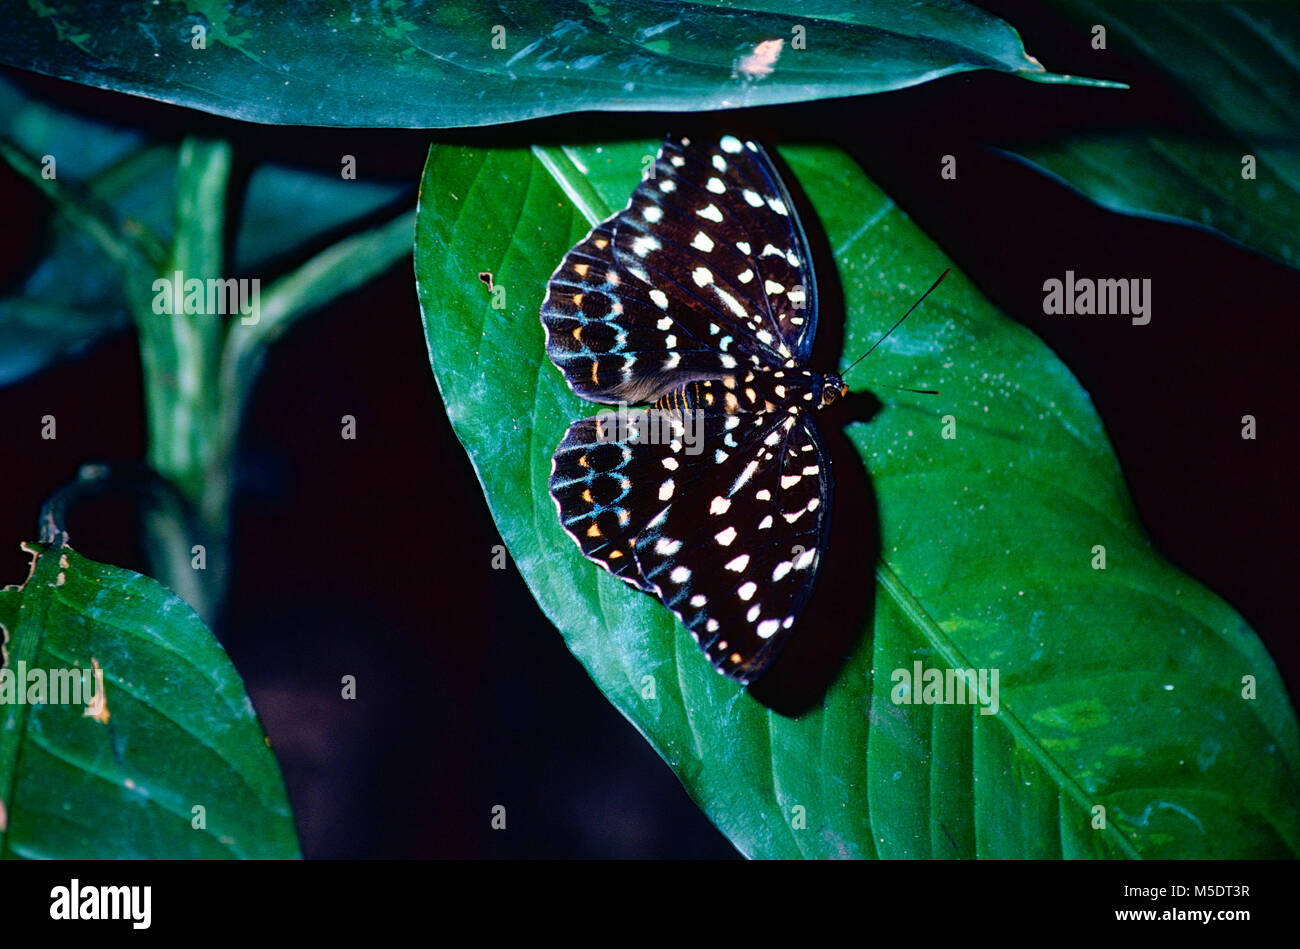 Archduke, Euthalia dirtea, Nymphalide, butterfly, female, insect, animal, Singapore Stock Photo